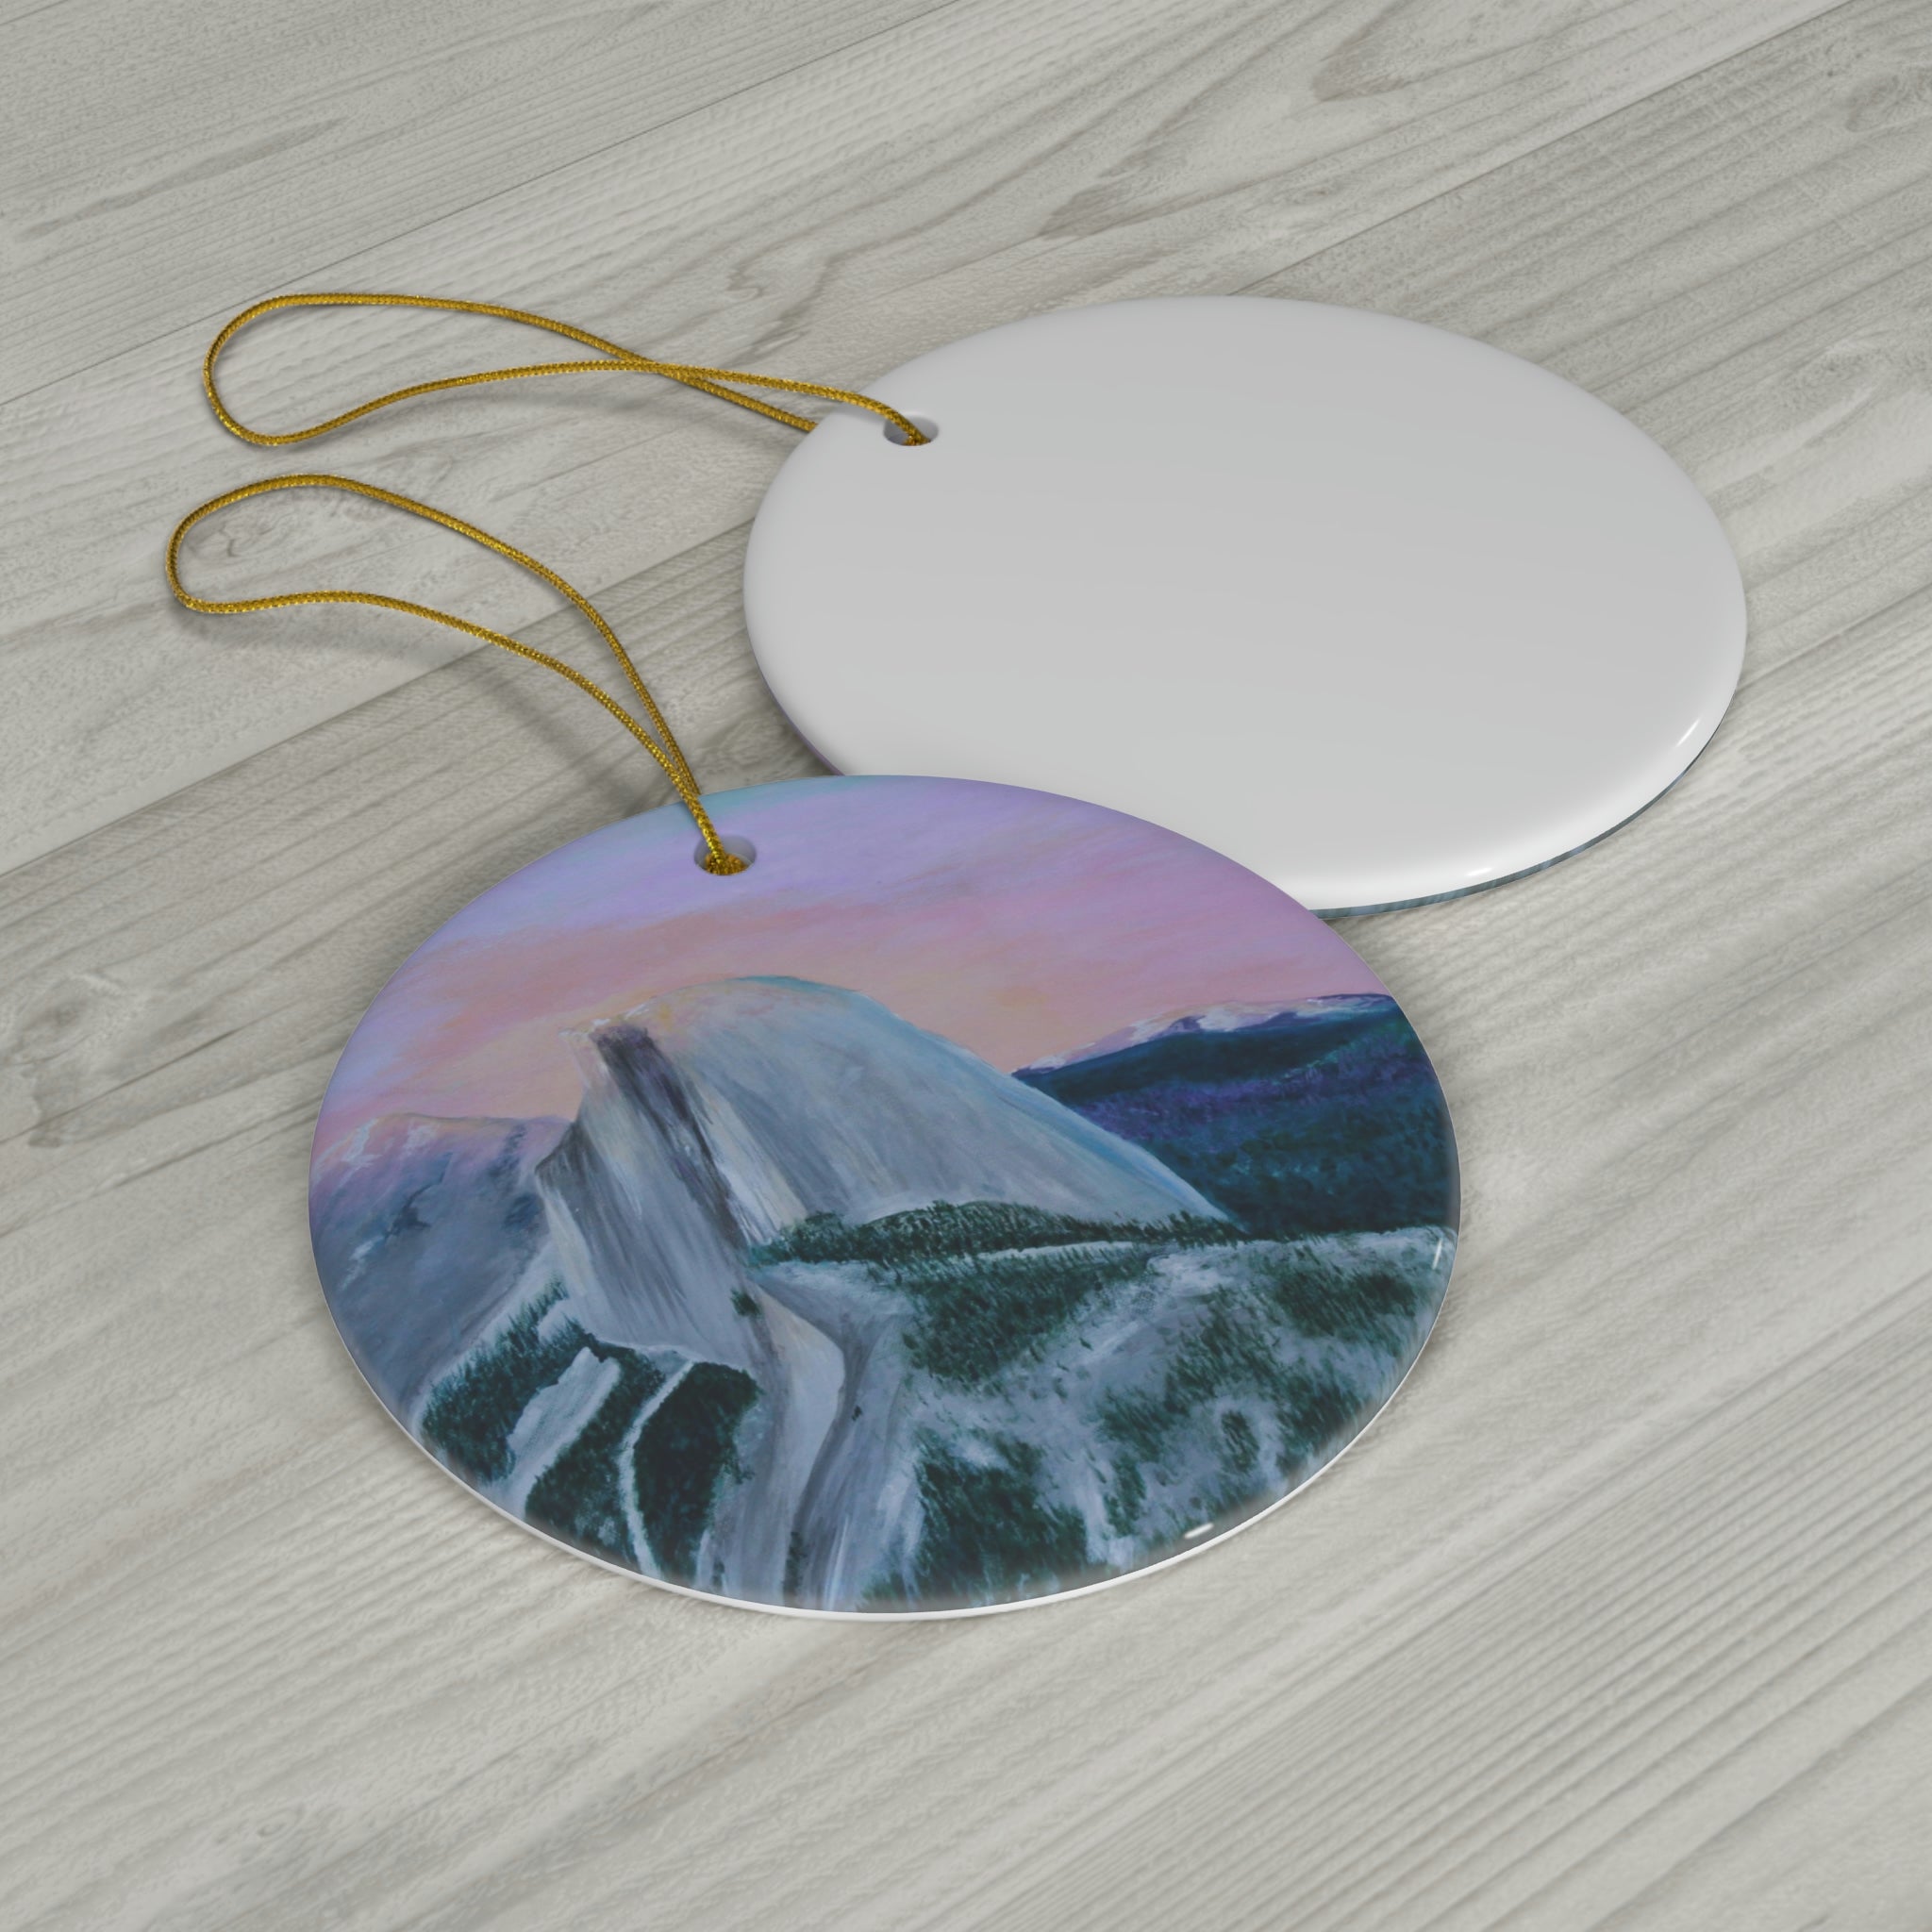 yosemite national park ornament - With the tees